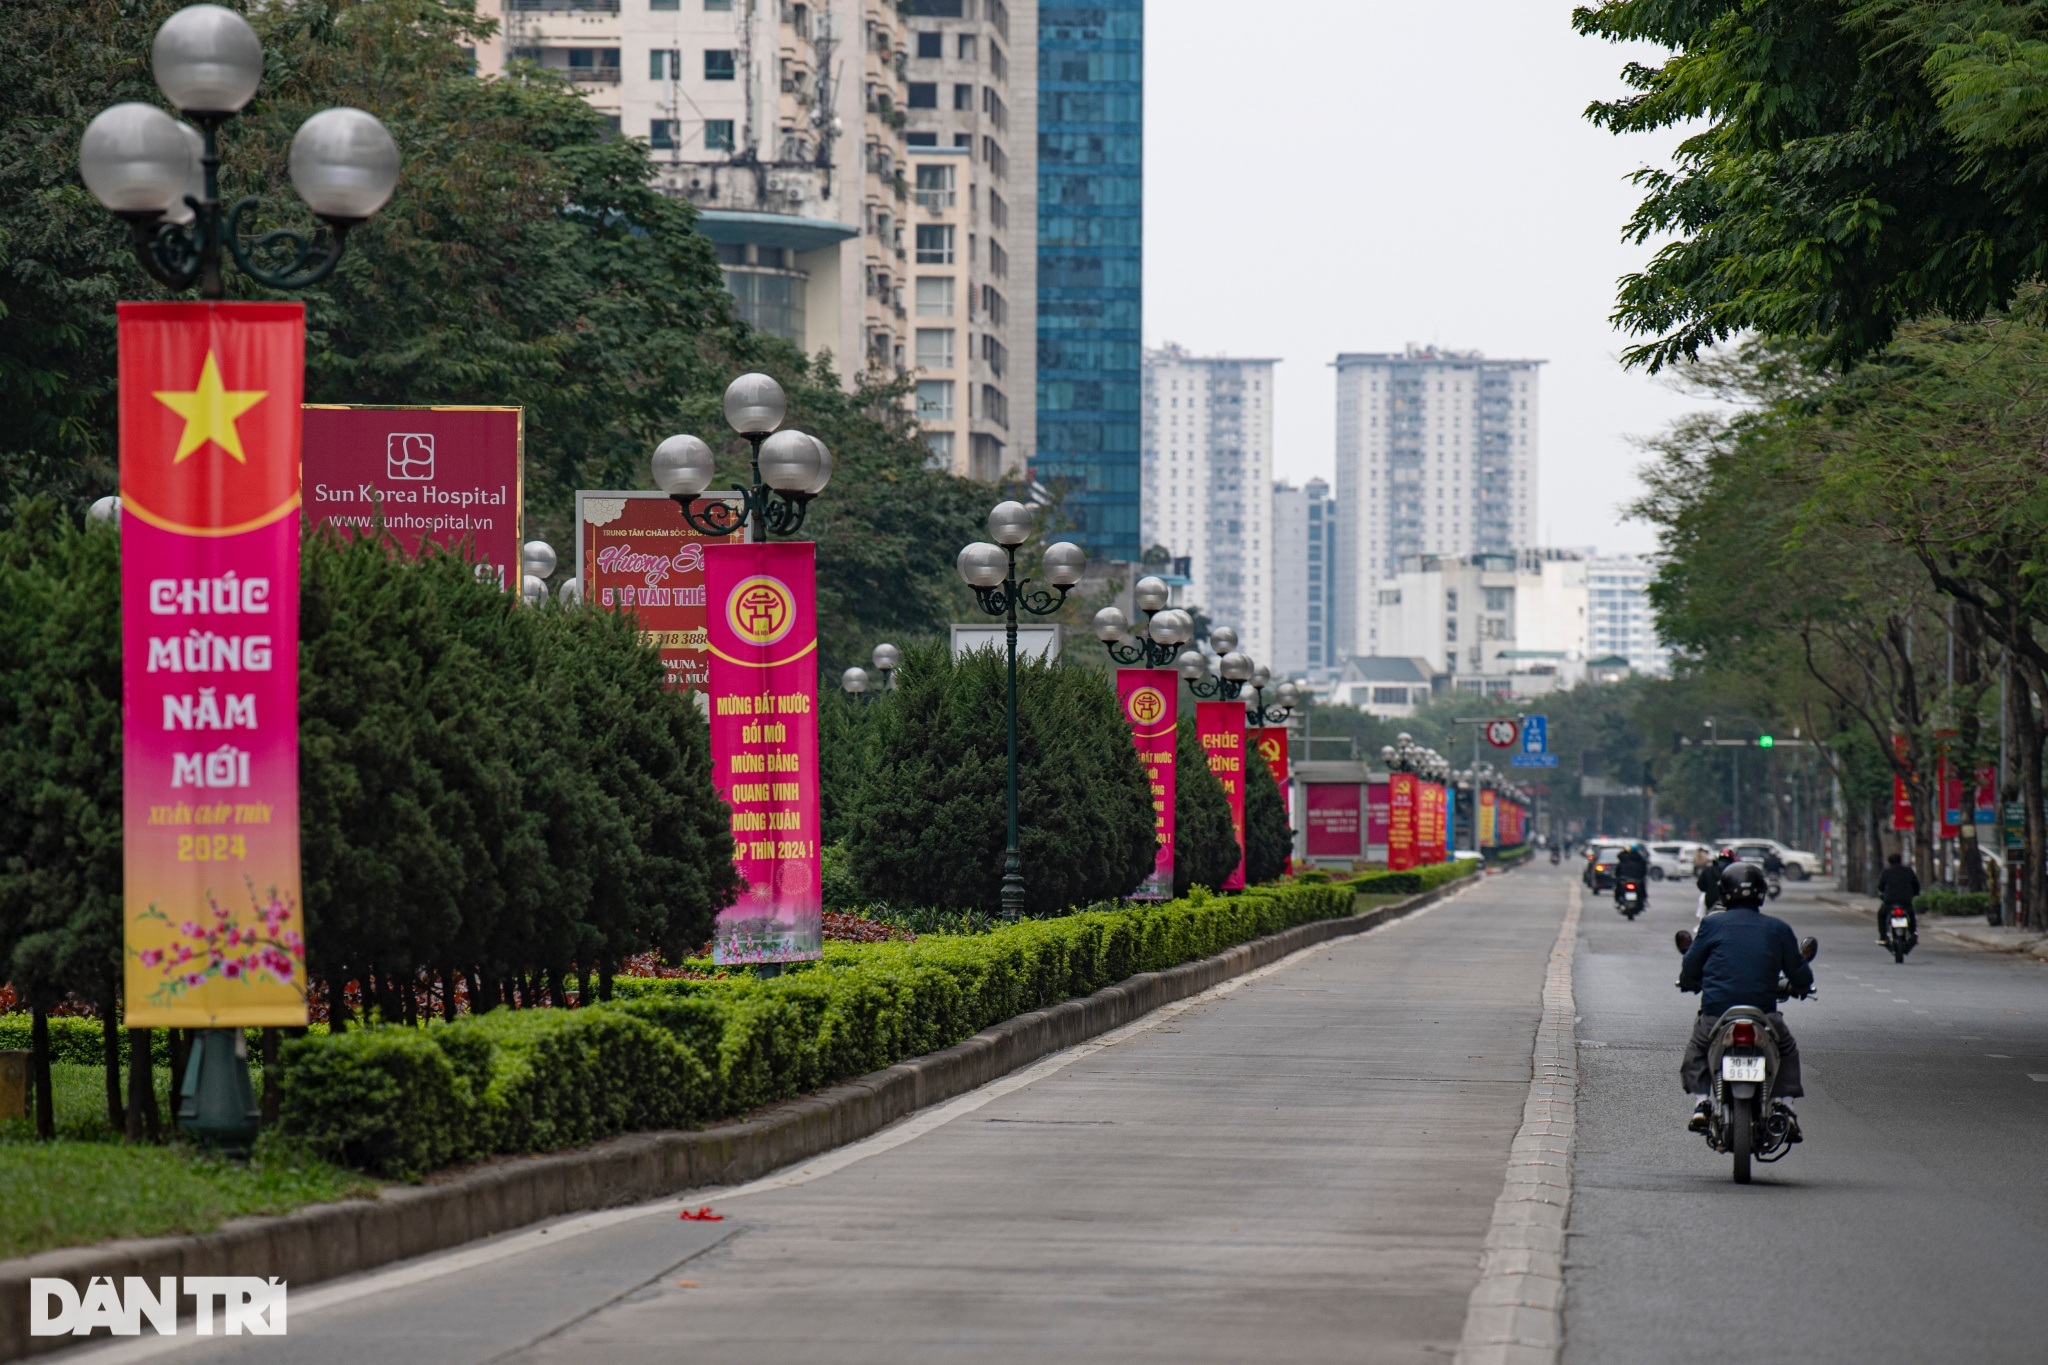 Hanoi streets are deserted on the afternoon of Tet - November 30